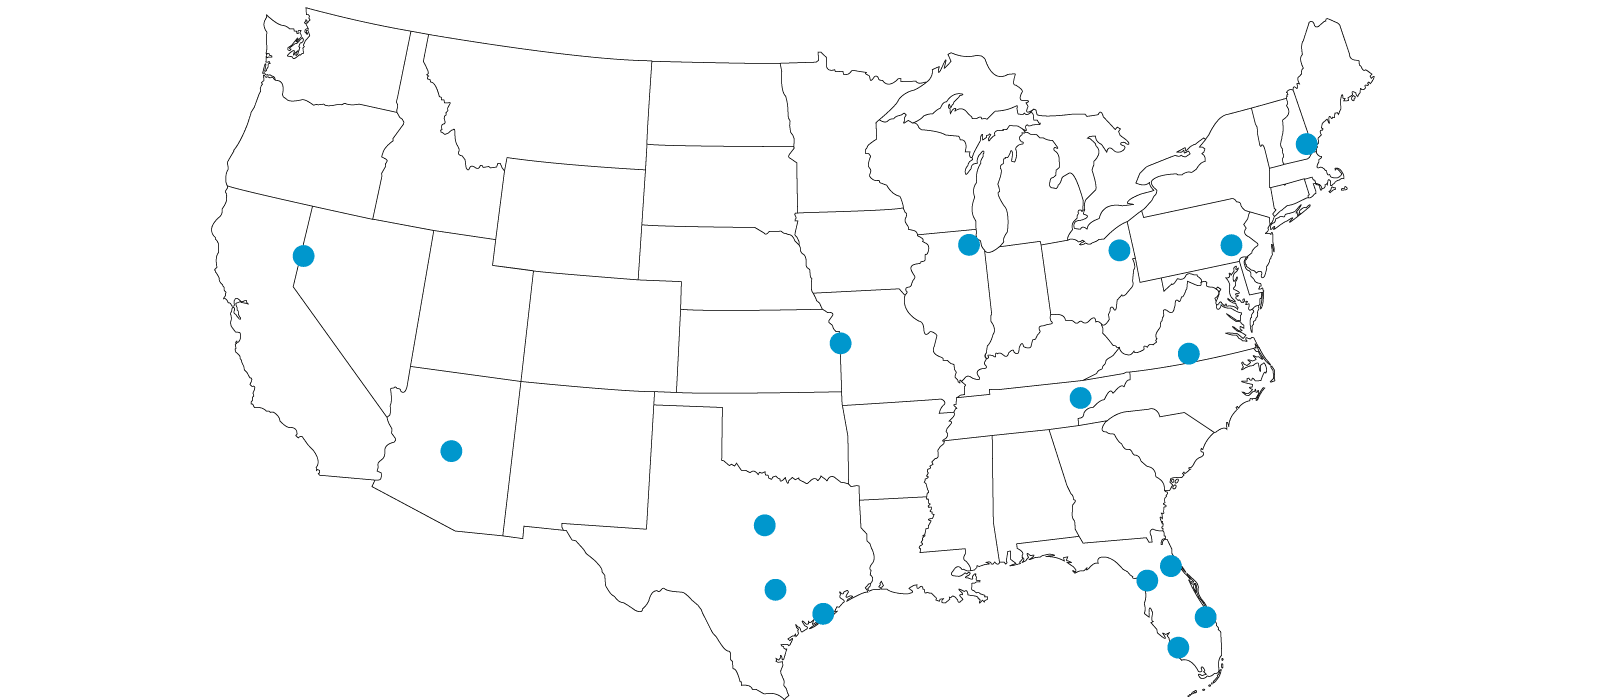 Charger Locations map